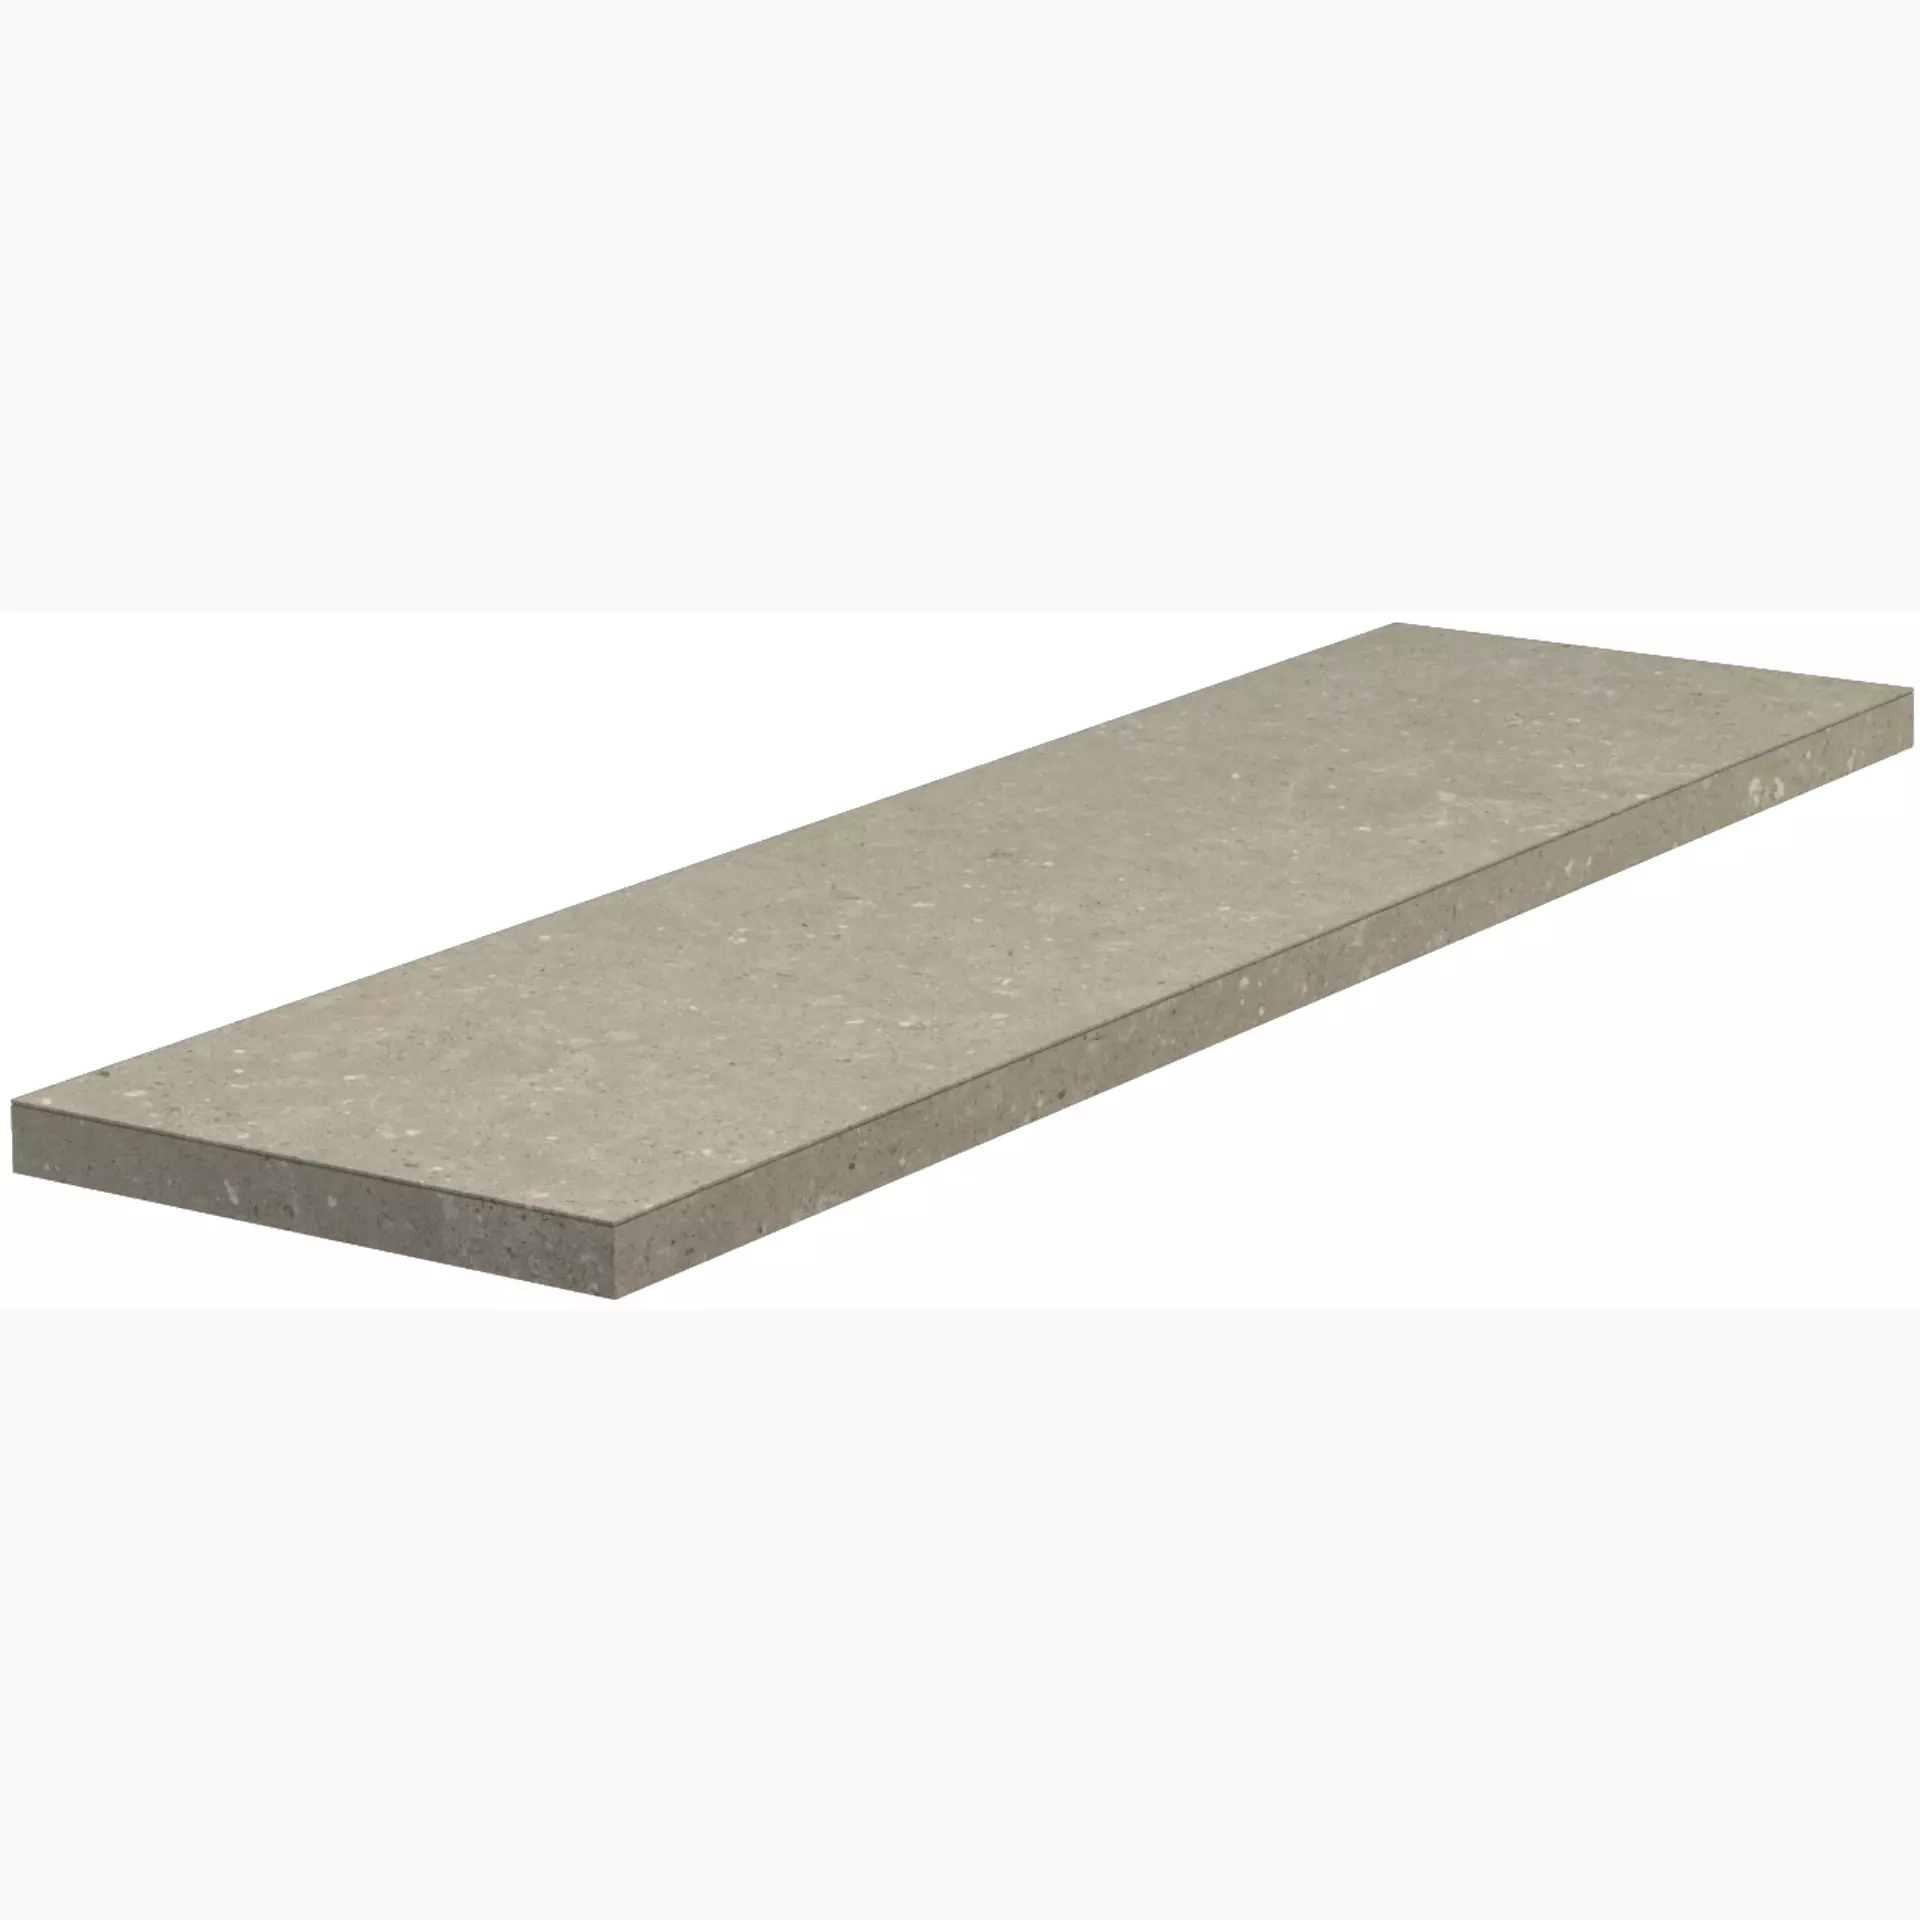 Del Conca Hwd Wild Greige Hwd11 Naturale Corner plate Step Left G3WD11RGS12 33x120cm rectified 8,5mm